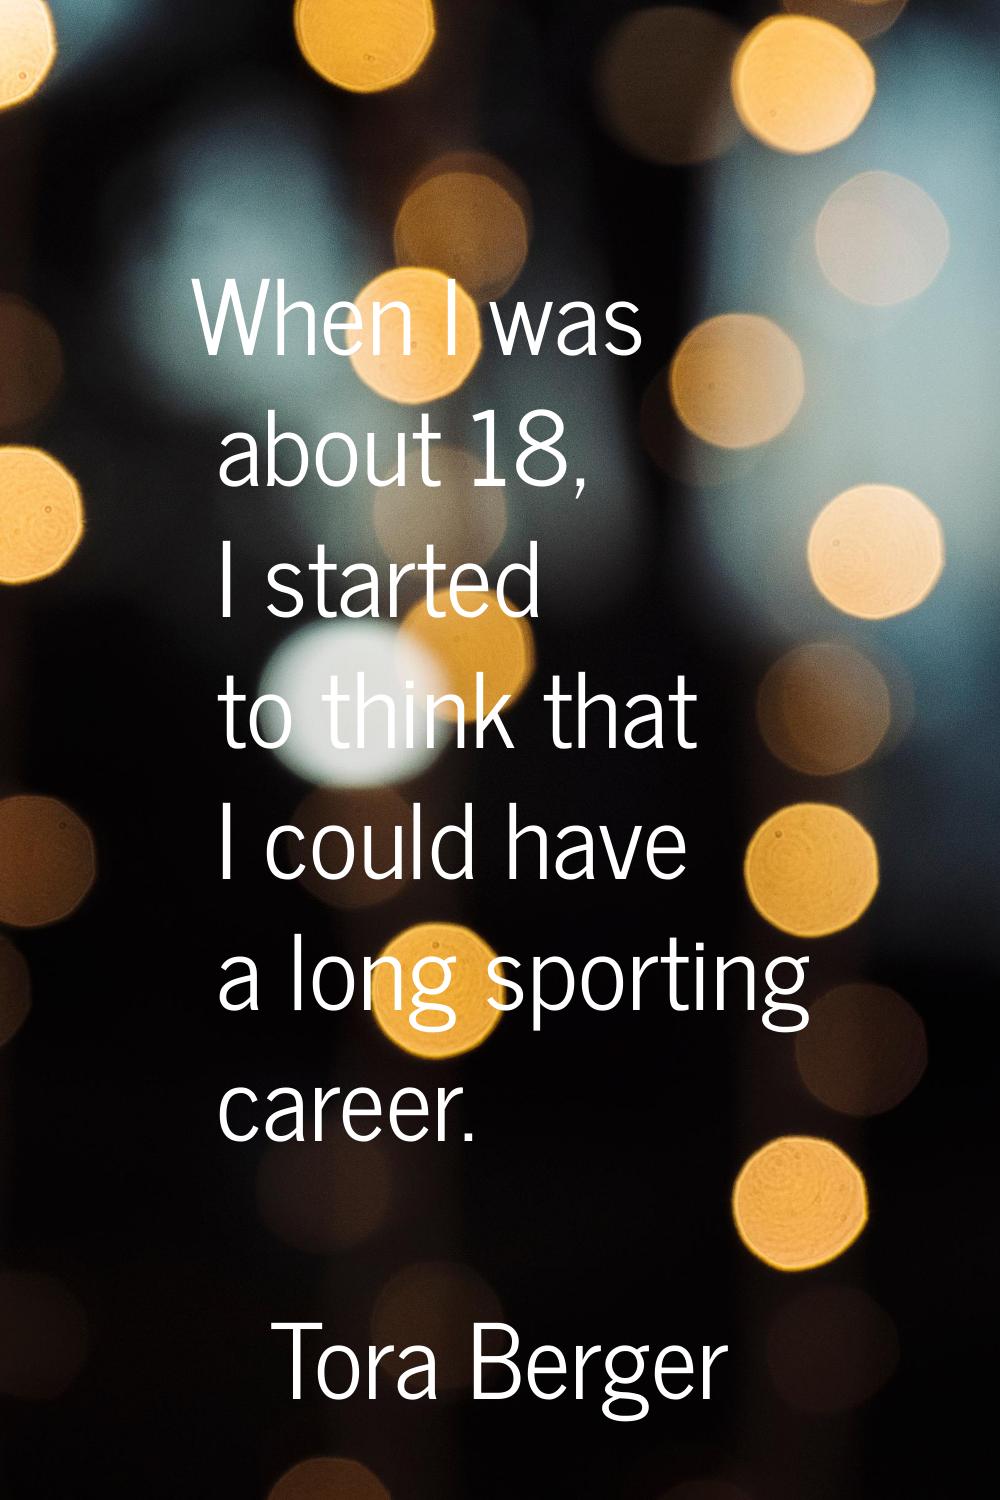 When I was about 18, I started to think that I could have a long sporting career.